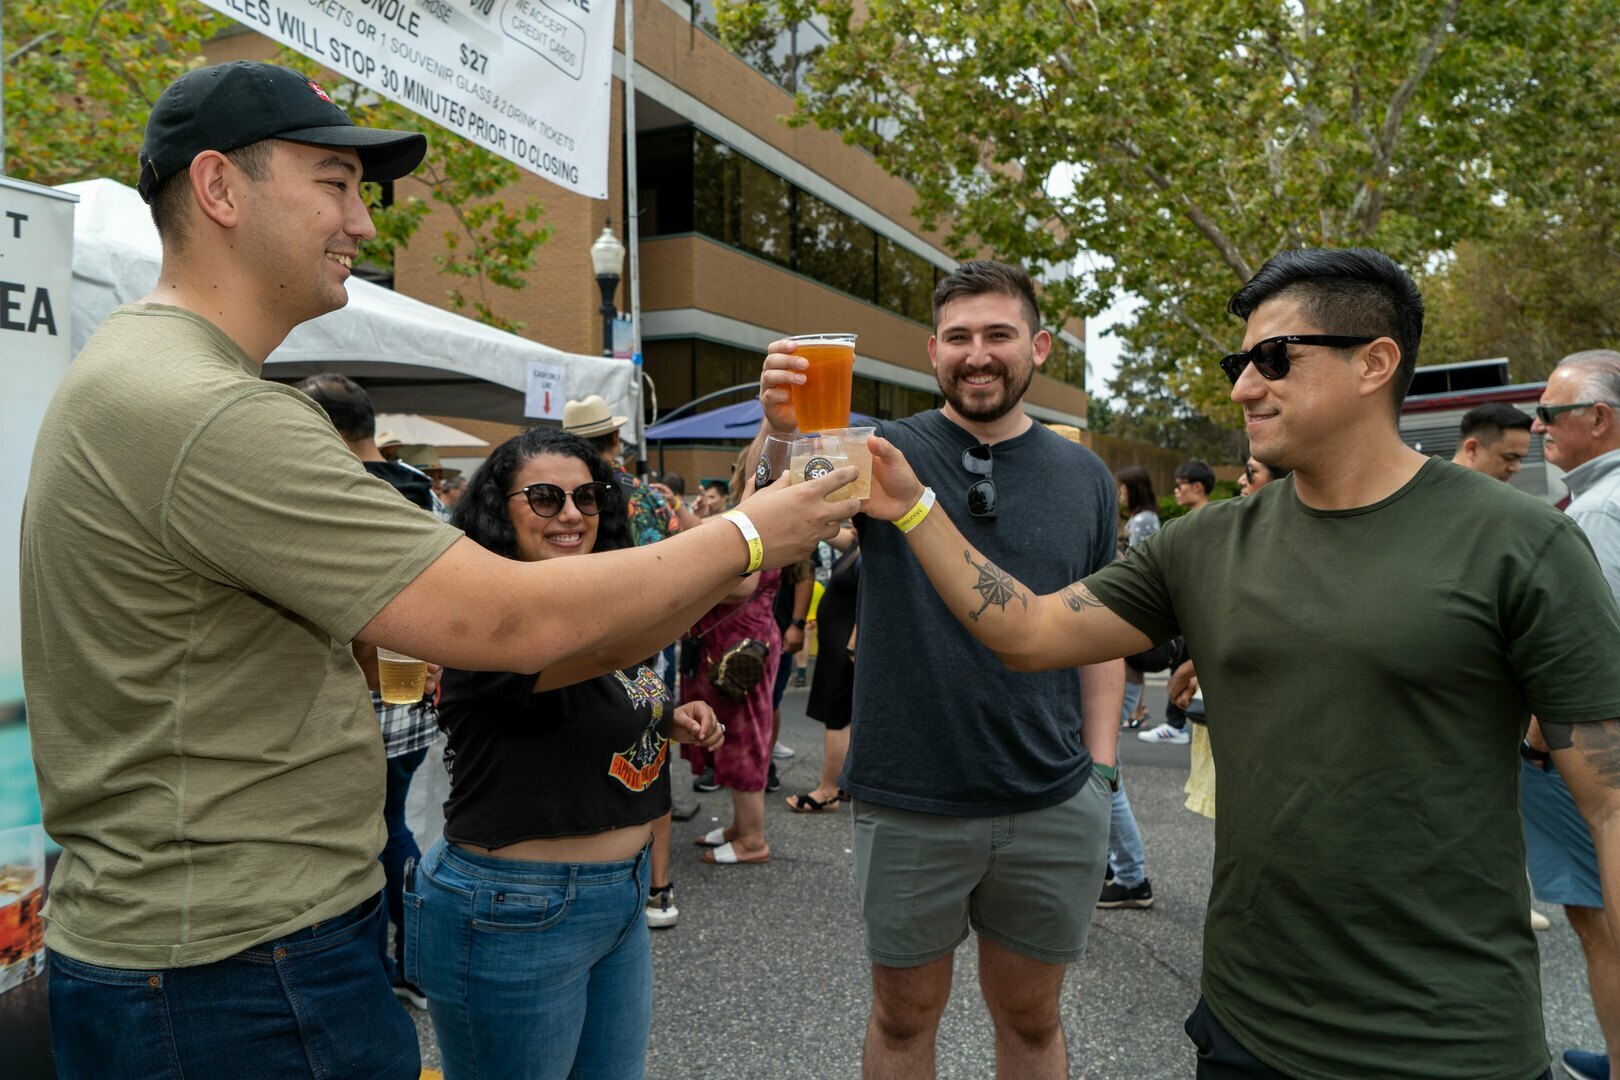 51st Mountain View Art and Wine Festival, A Festival Like No Other, Mountain View, California, United States